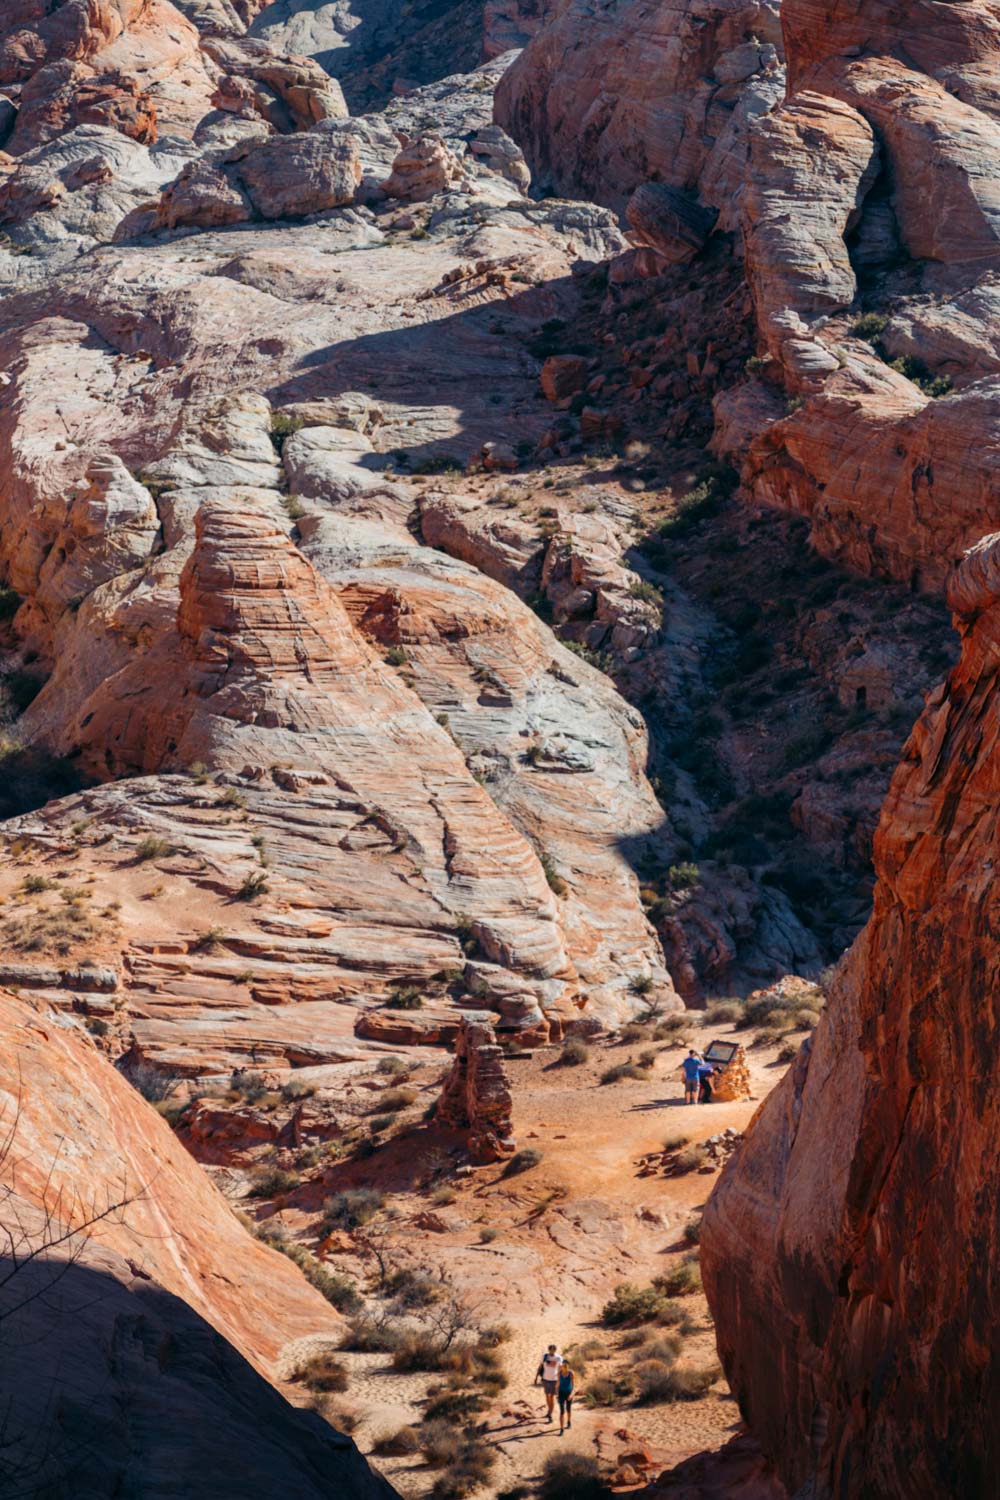 Hike White Domes Trail in Valley of Fire - Roads and Destinations